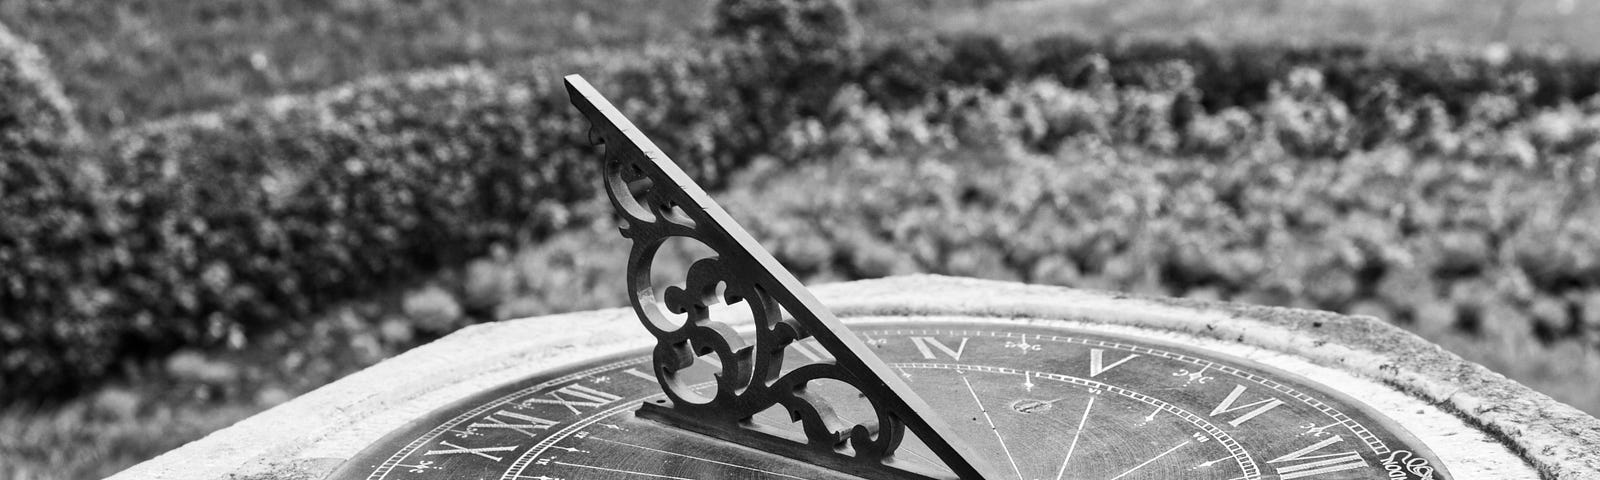 A sundial- black and white photo